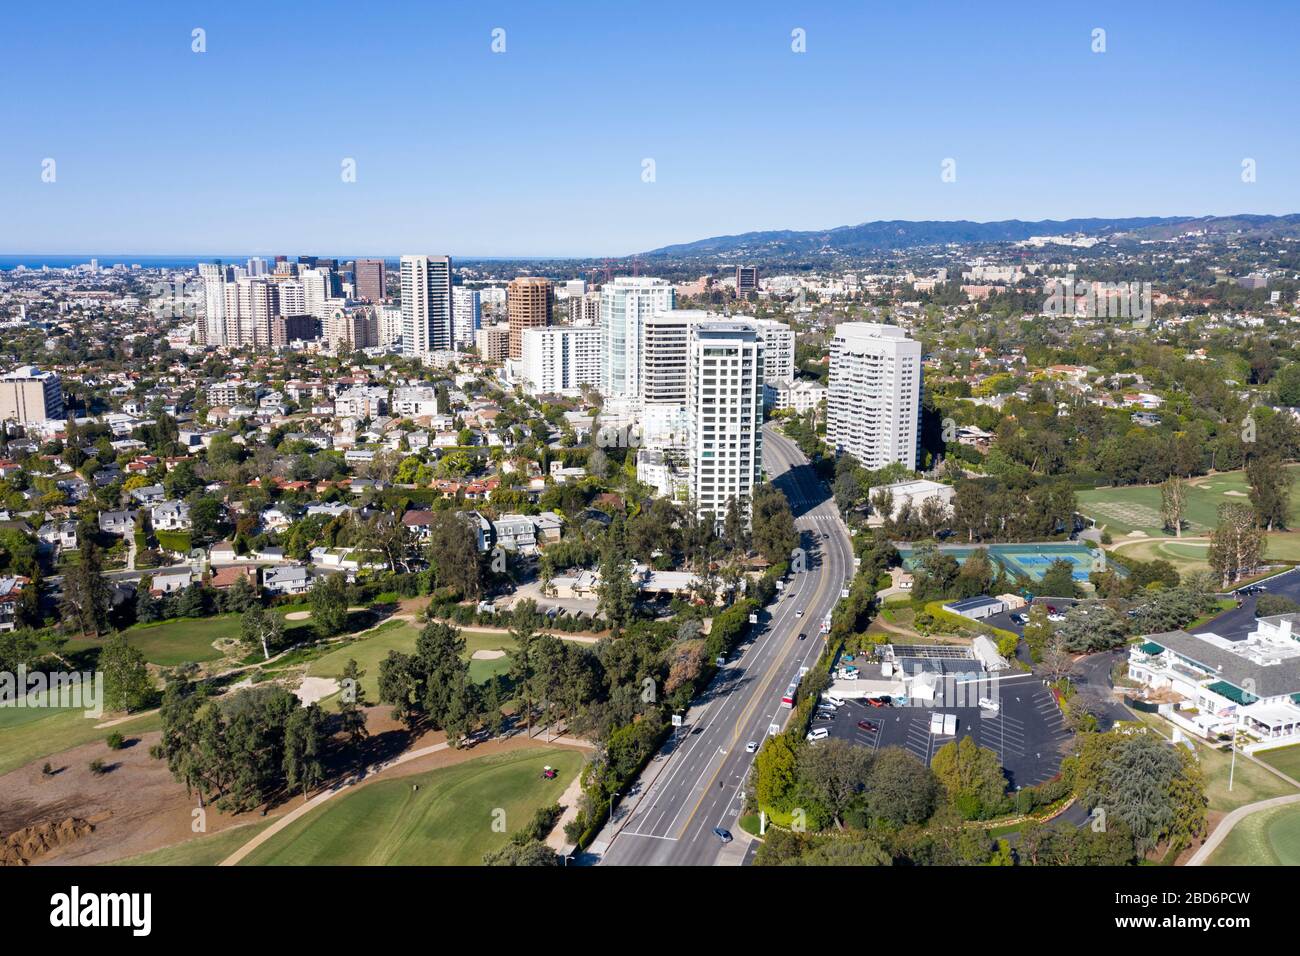 Aerial view of Wilshire corridor towers in Westwood, west Los Angeles, California Stock Photo